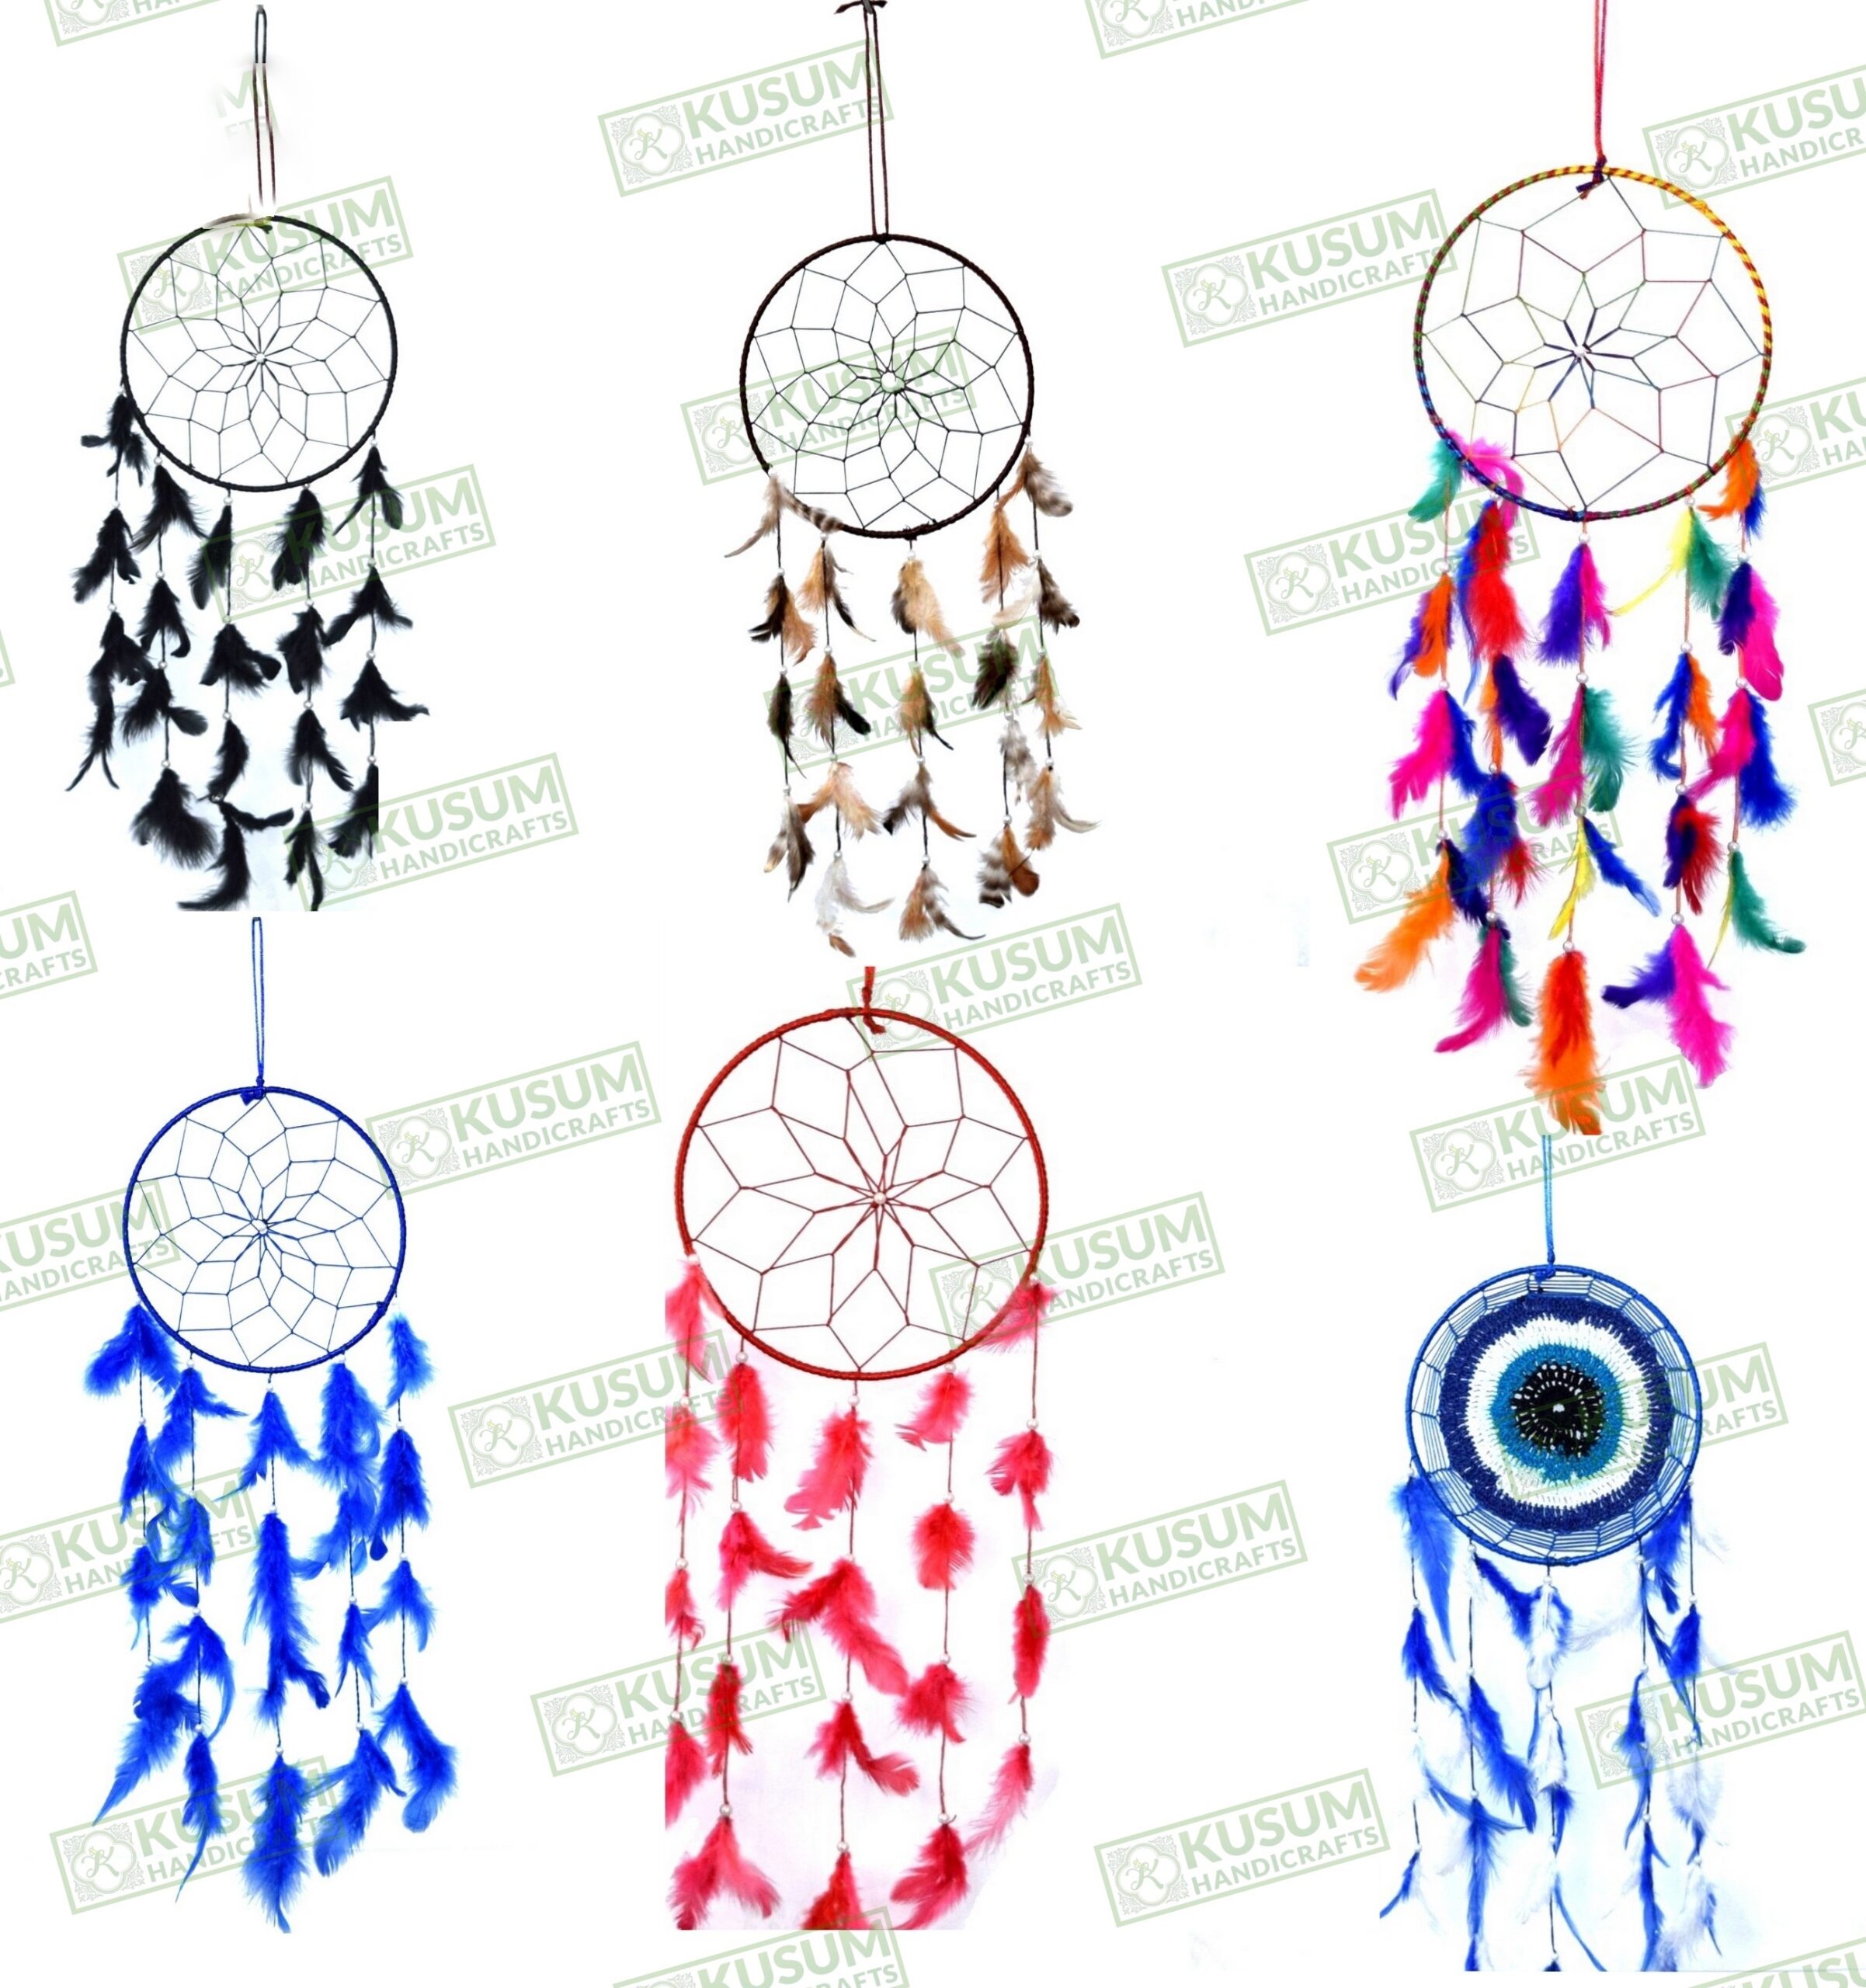 Details about   1 piece Wholesale Handmade Dream Catchers Wall Hanging Decoration USA SELLER 